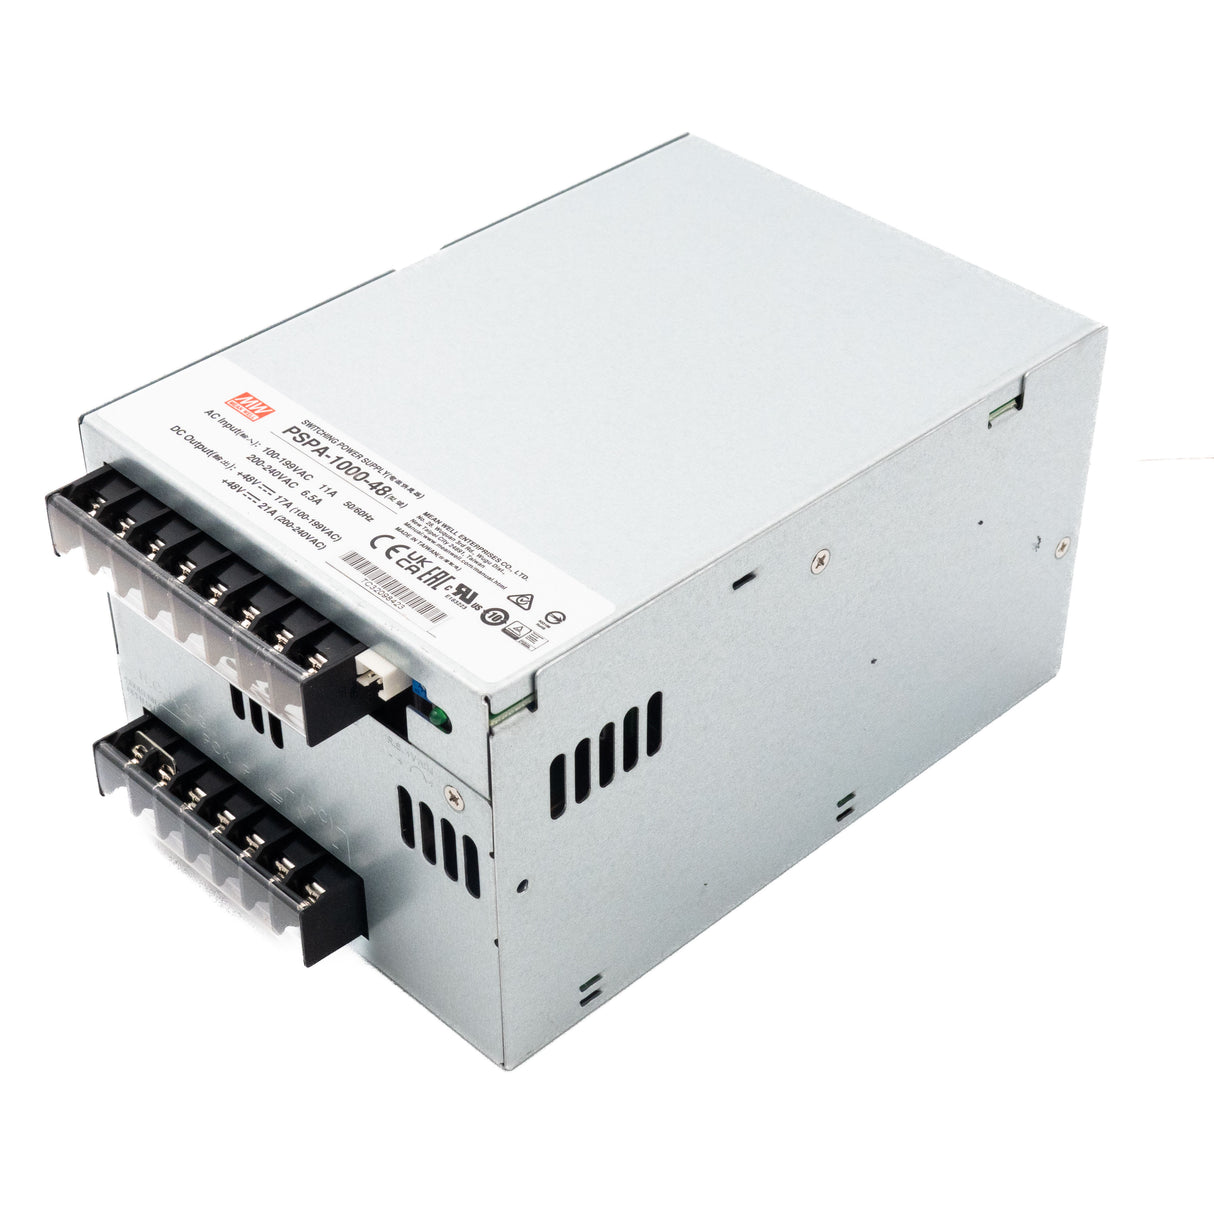 Mean Well PSPA-1000-48 Power Supply 1000W 48V - PHOTO 3